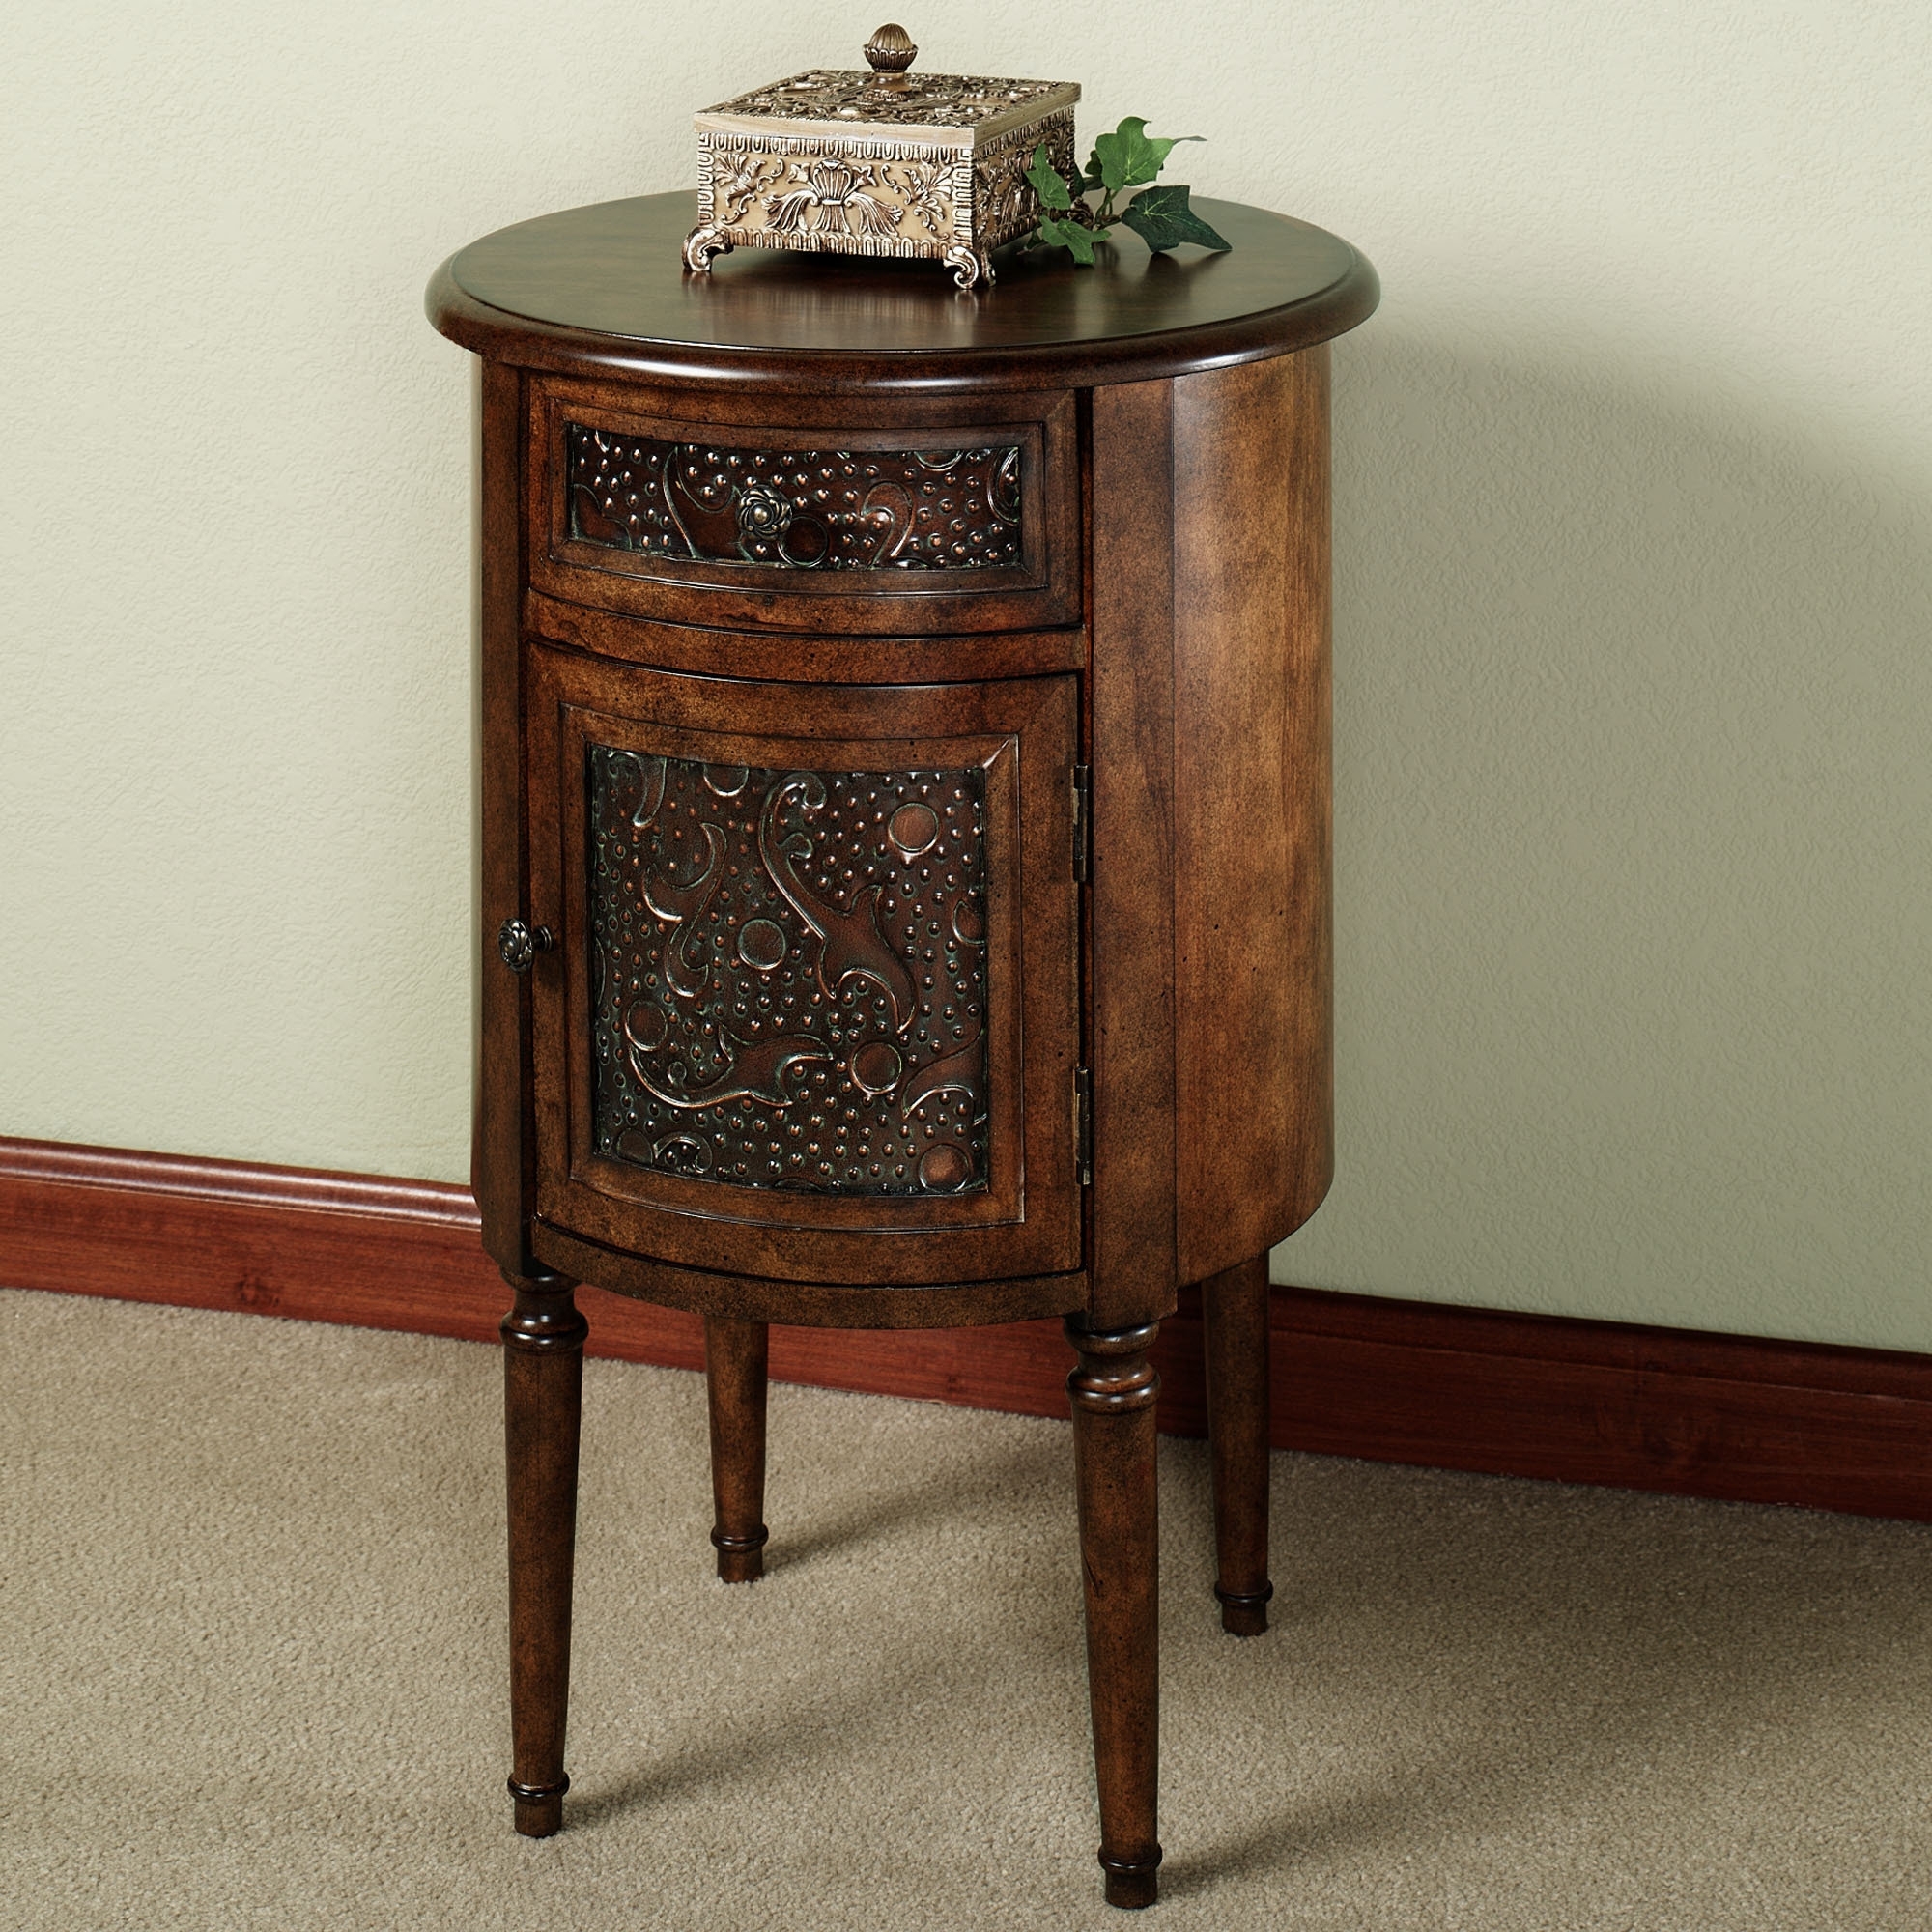 nice and clean look corner accent table the home redesign beautiful round with wood industrial vanity furniture odd coffee tables modern sideboard sofa threshold stacking end